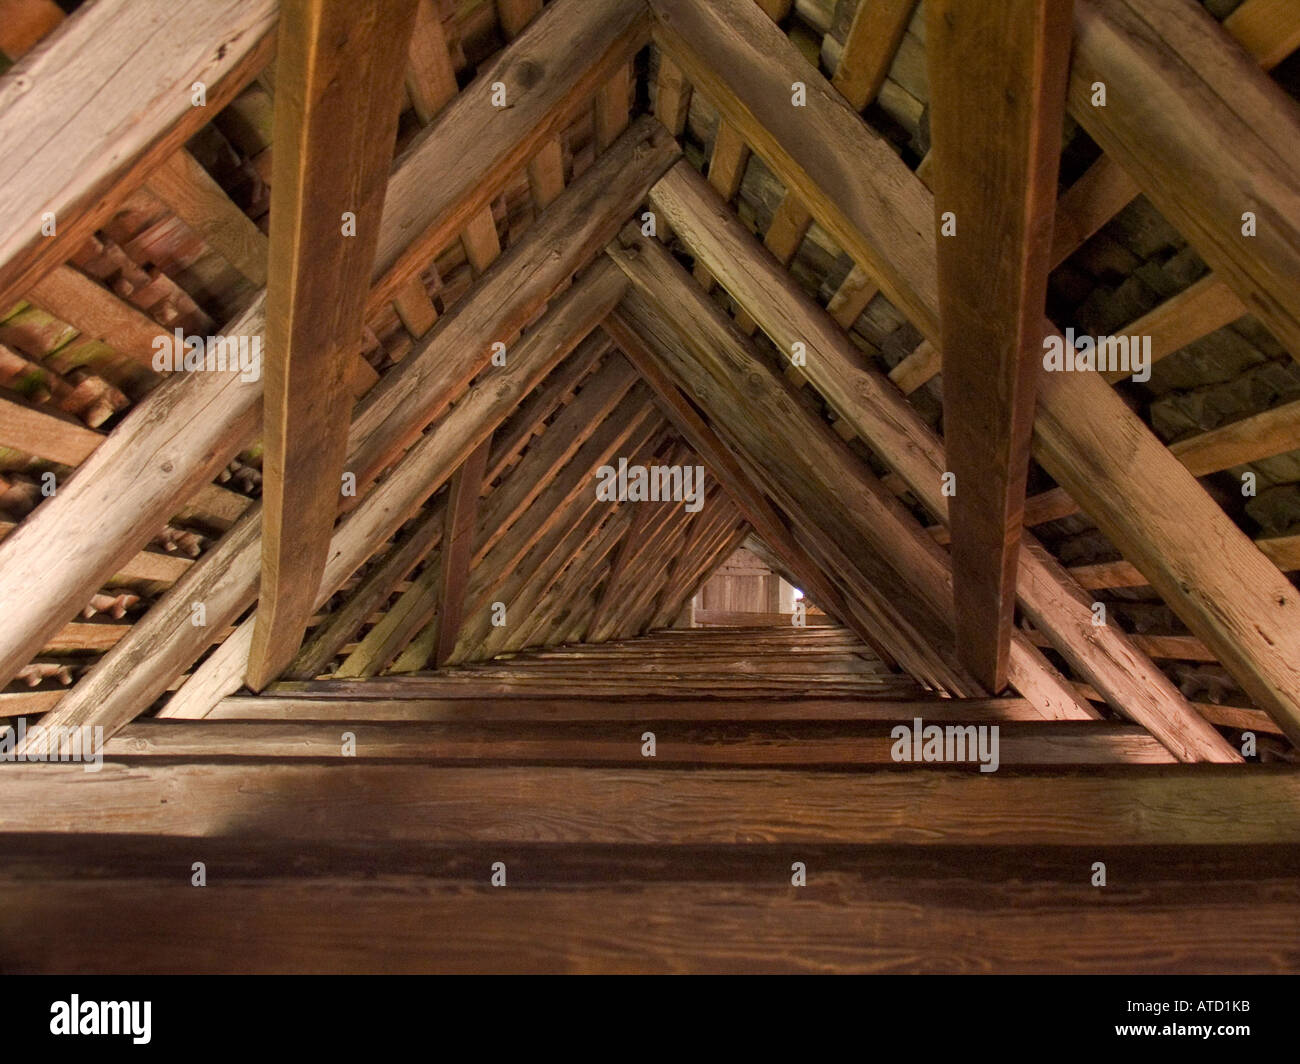 Interior wooden support structure of the roof of fortified wall around the medevial town of Murten Switzerland Stock Photo